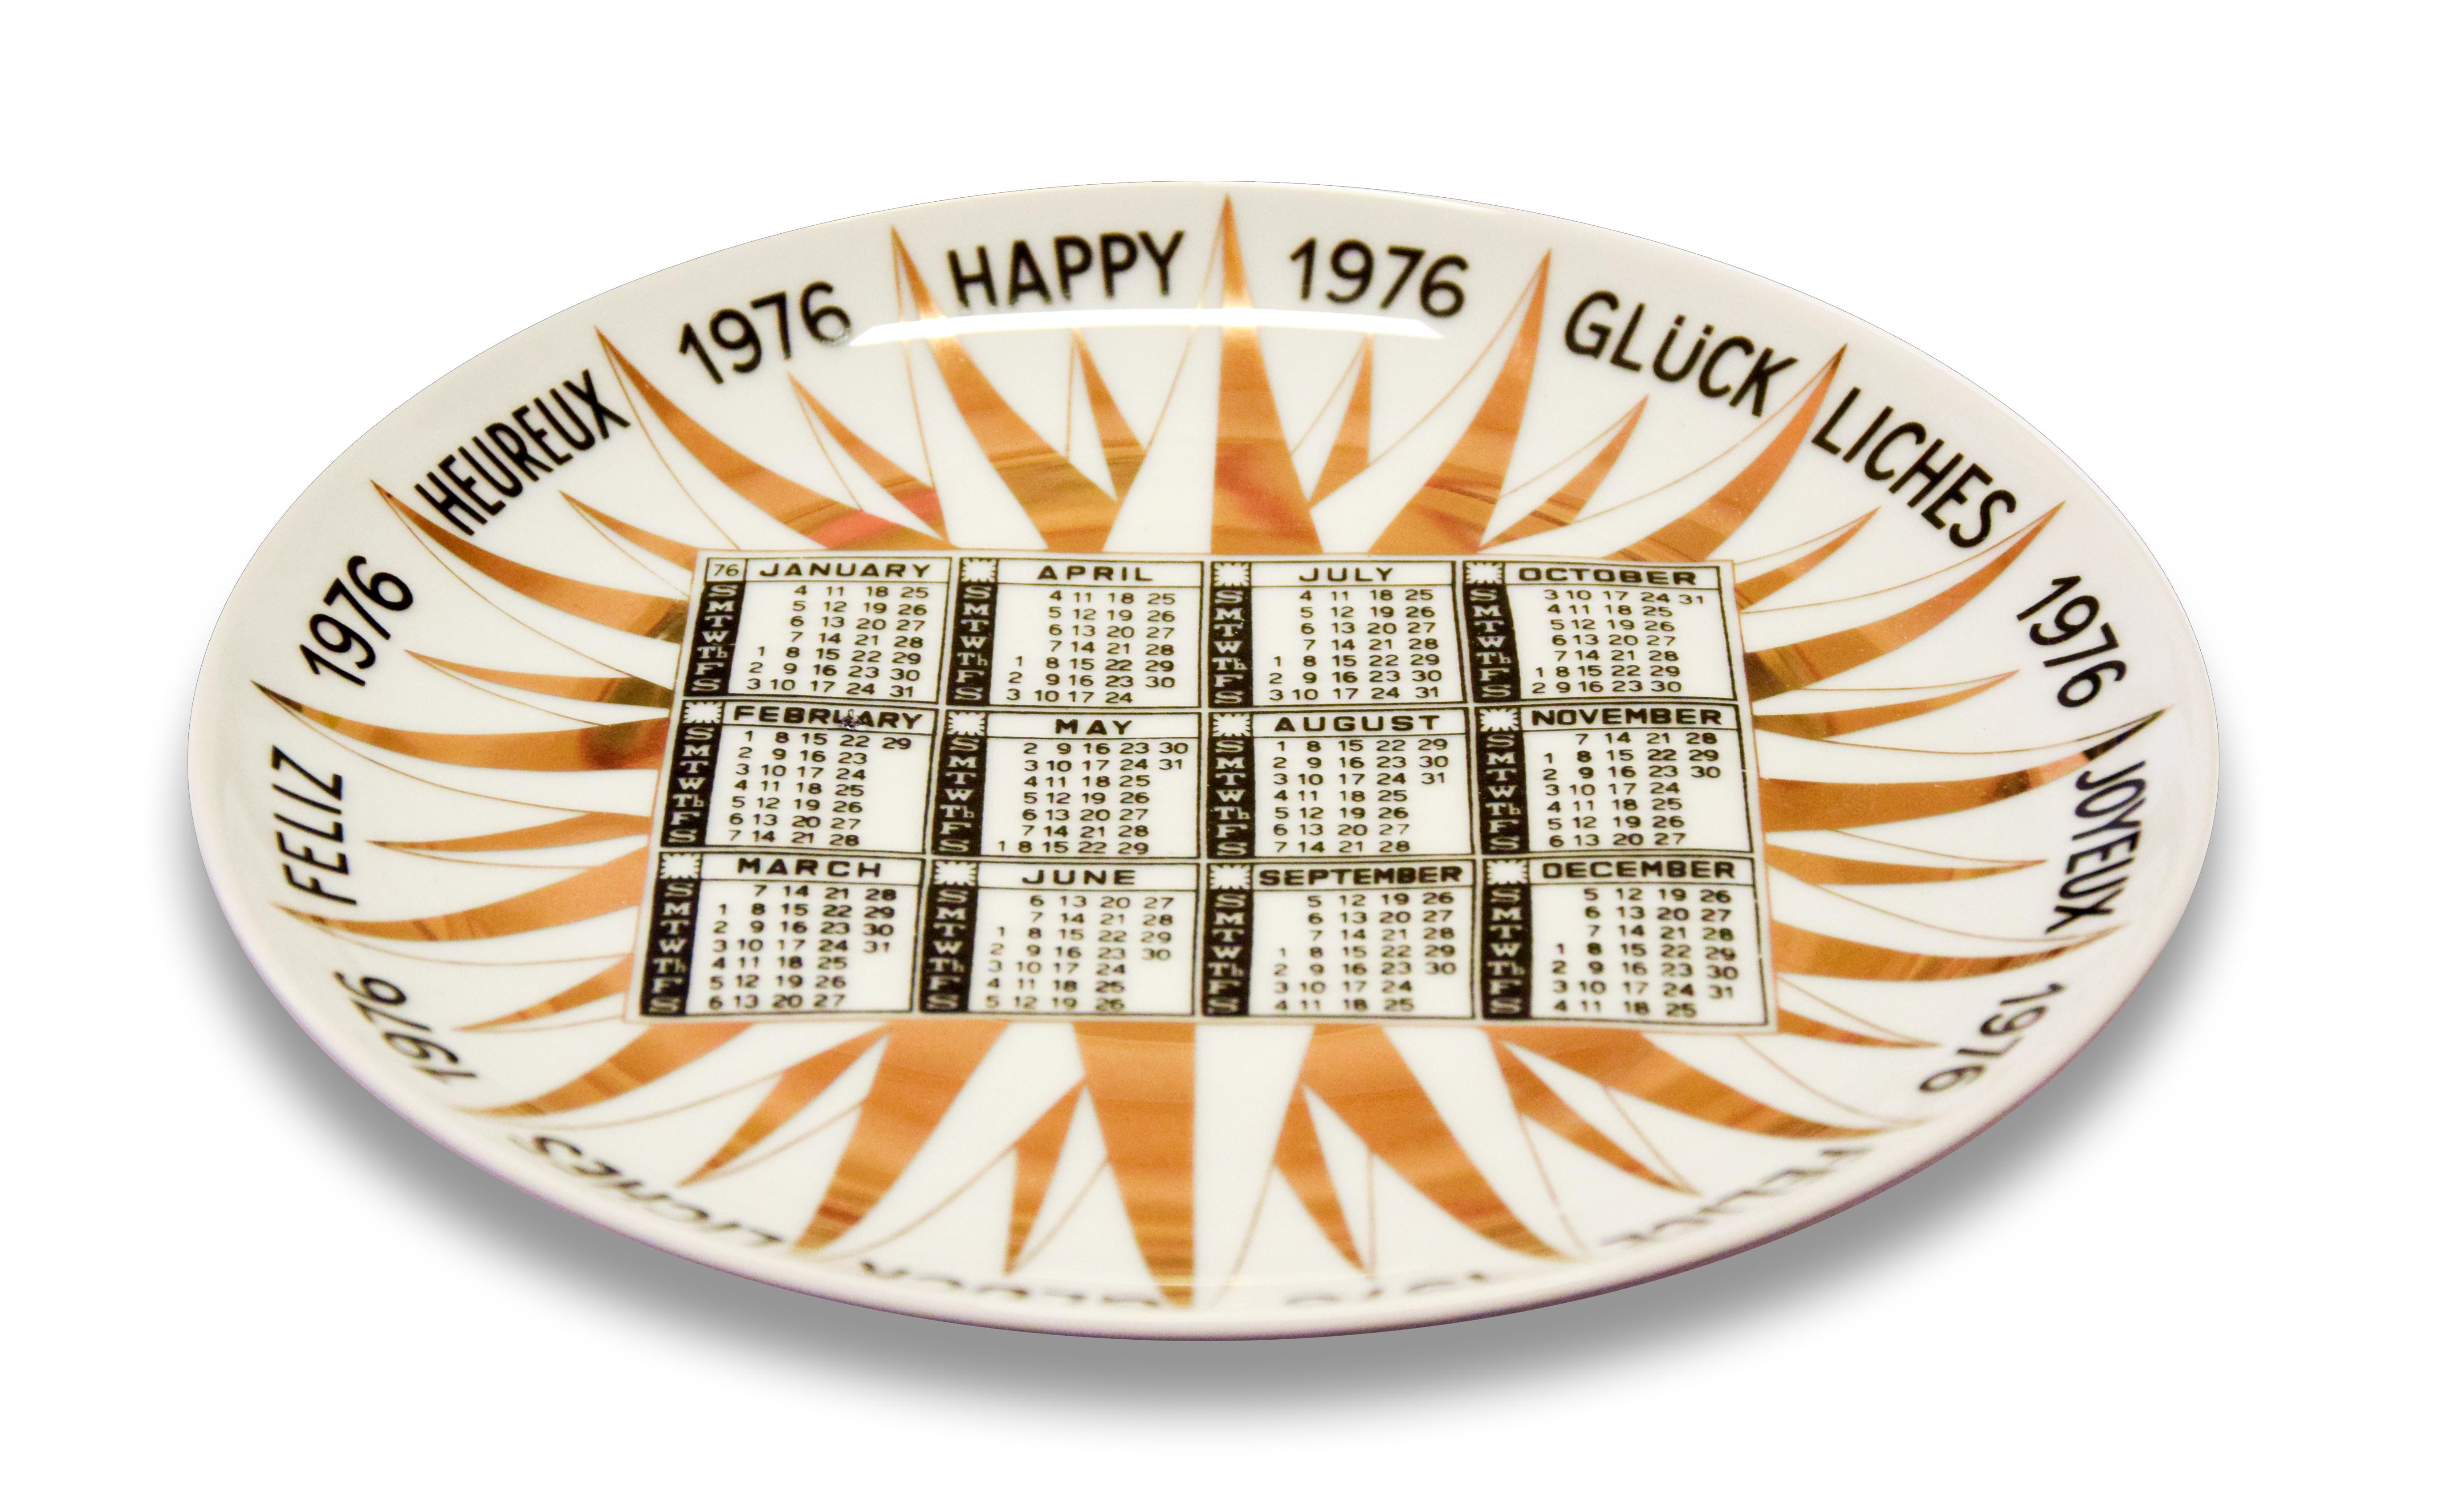 Felice 1976, Calendario is a silk-screened porcelain plate, designed by the Italian artist Piero Fornasetti in 1972.

From the Calendario series, the Happy New Year plates series. 

Excellent conditions, except for some imperceptible signs of